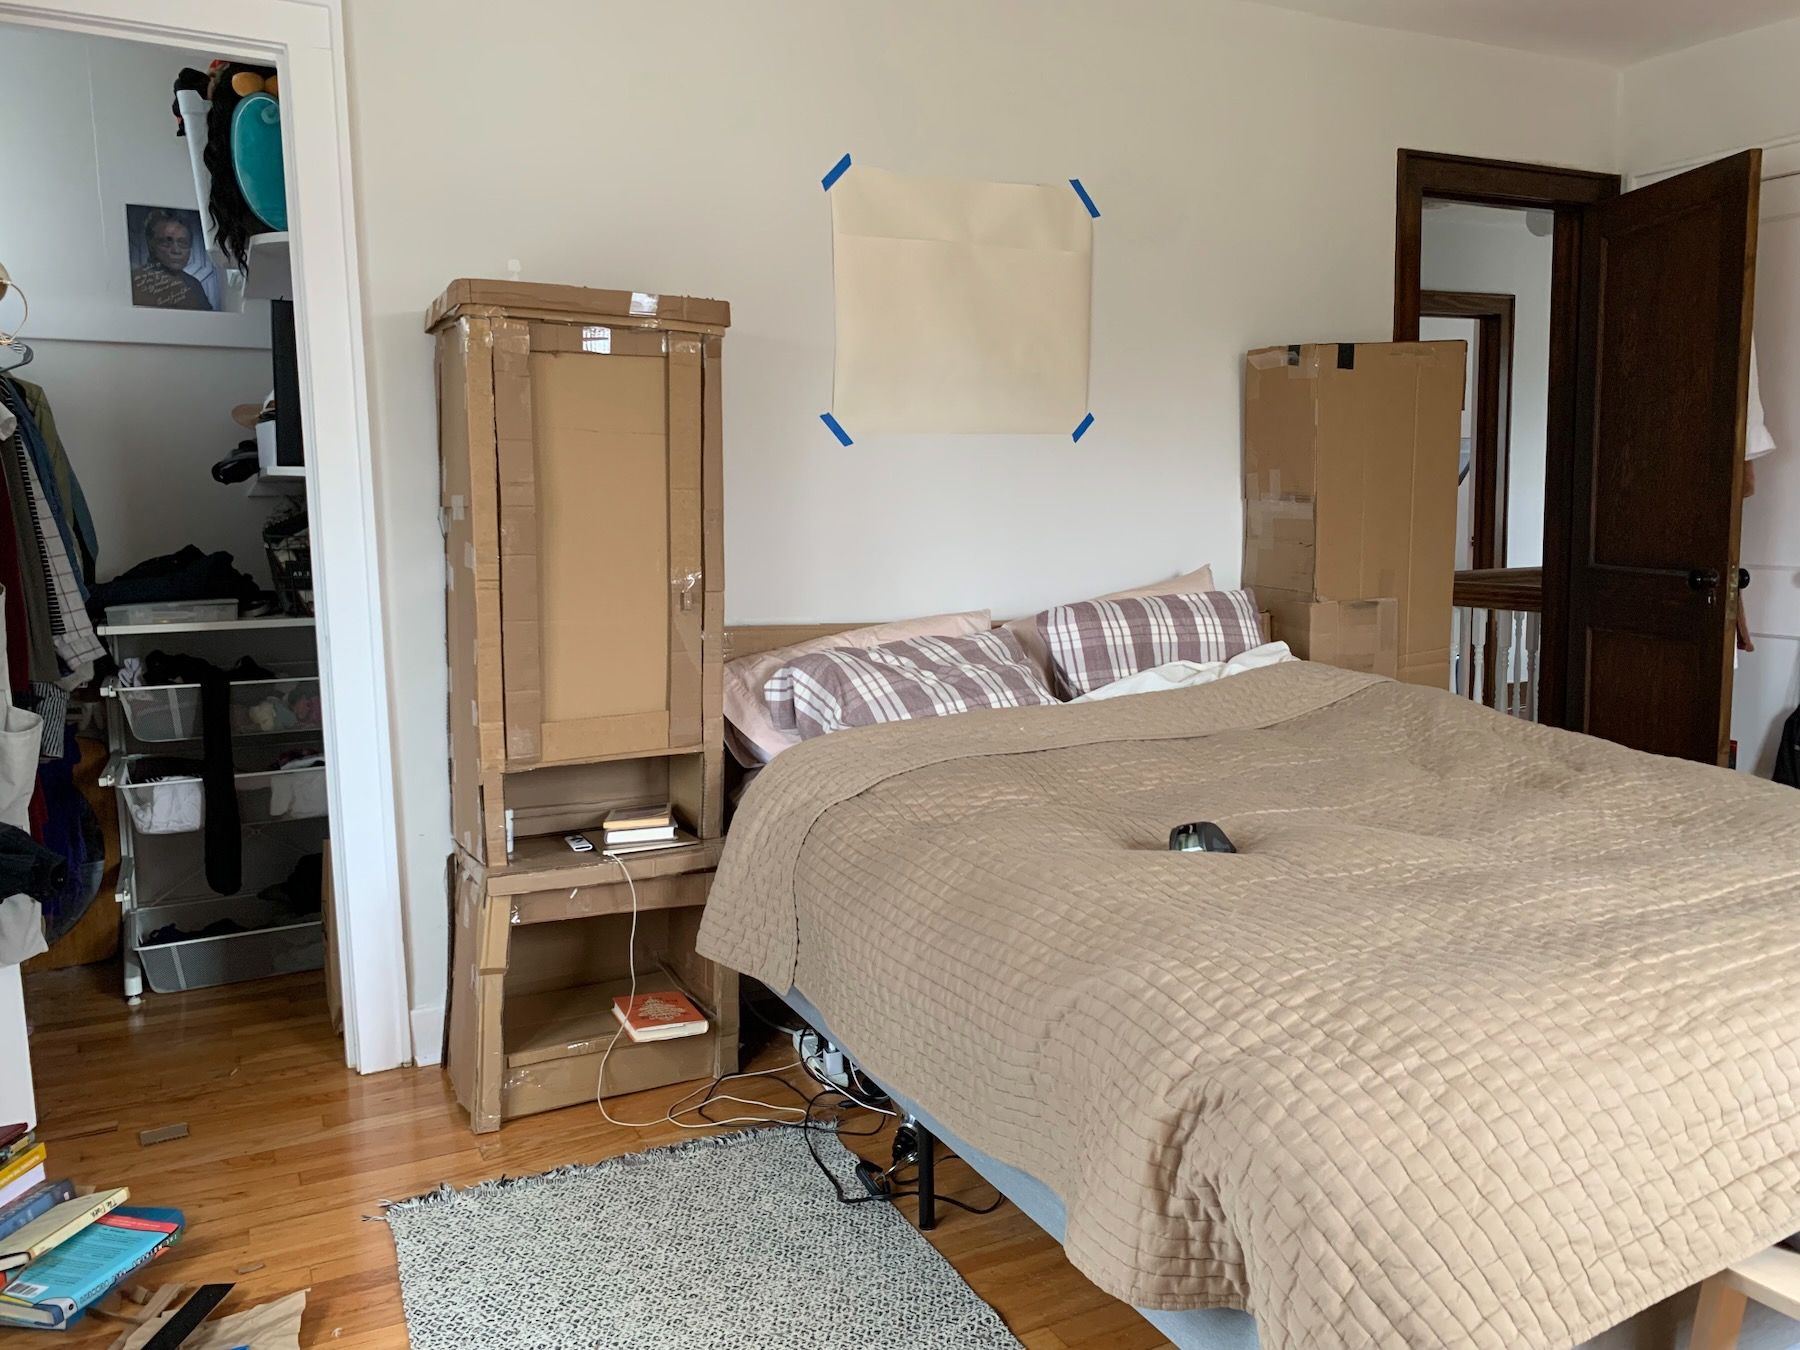 Full-size cardboard mockup of furniture project: two cabinets units and headboard at head of bed.